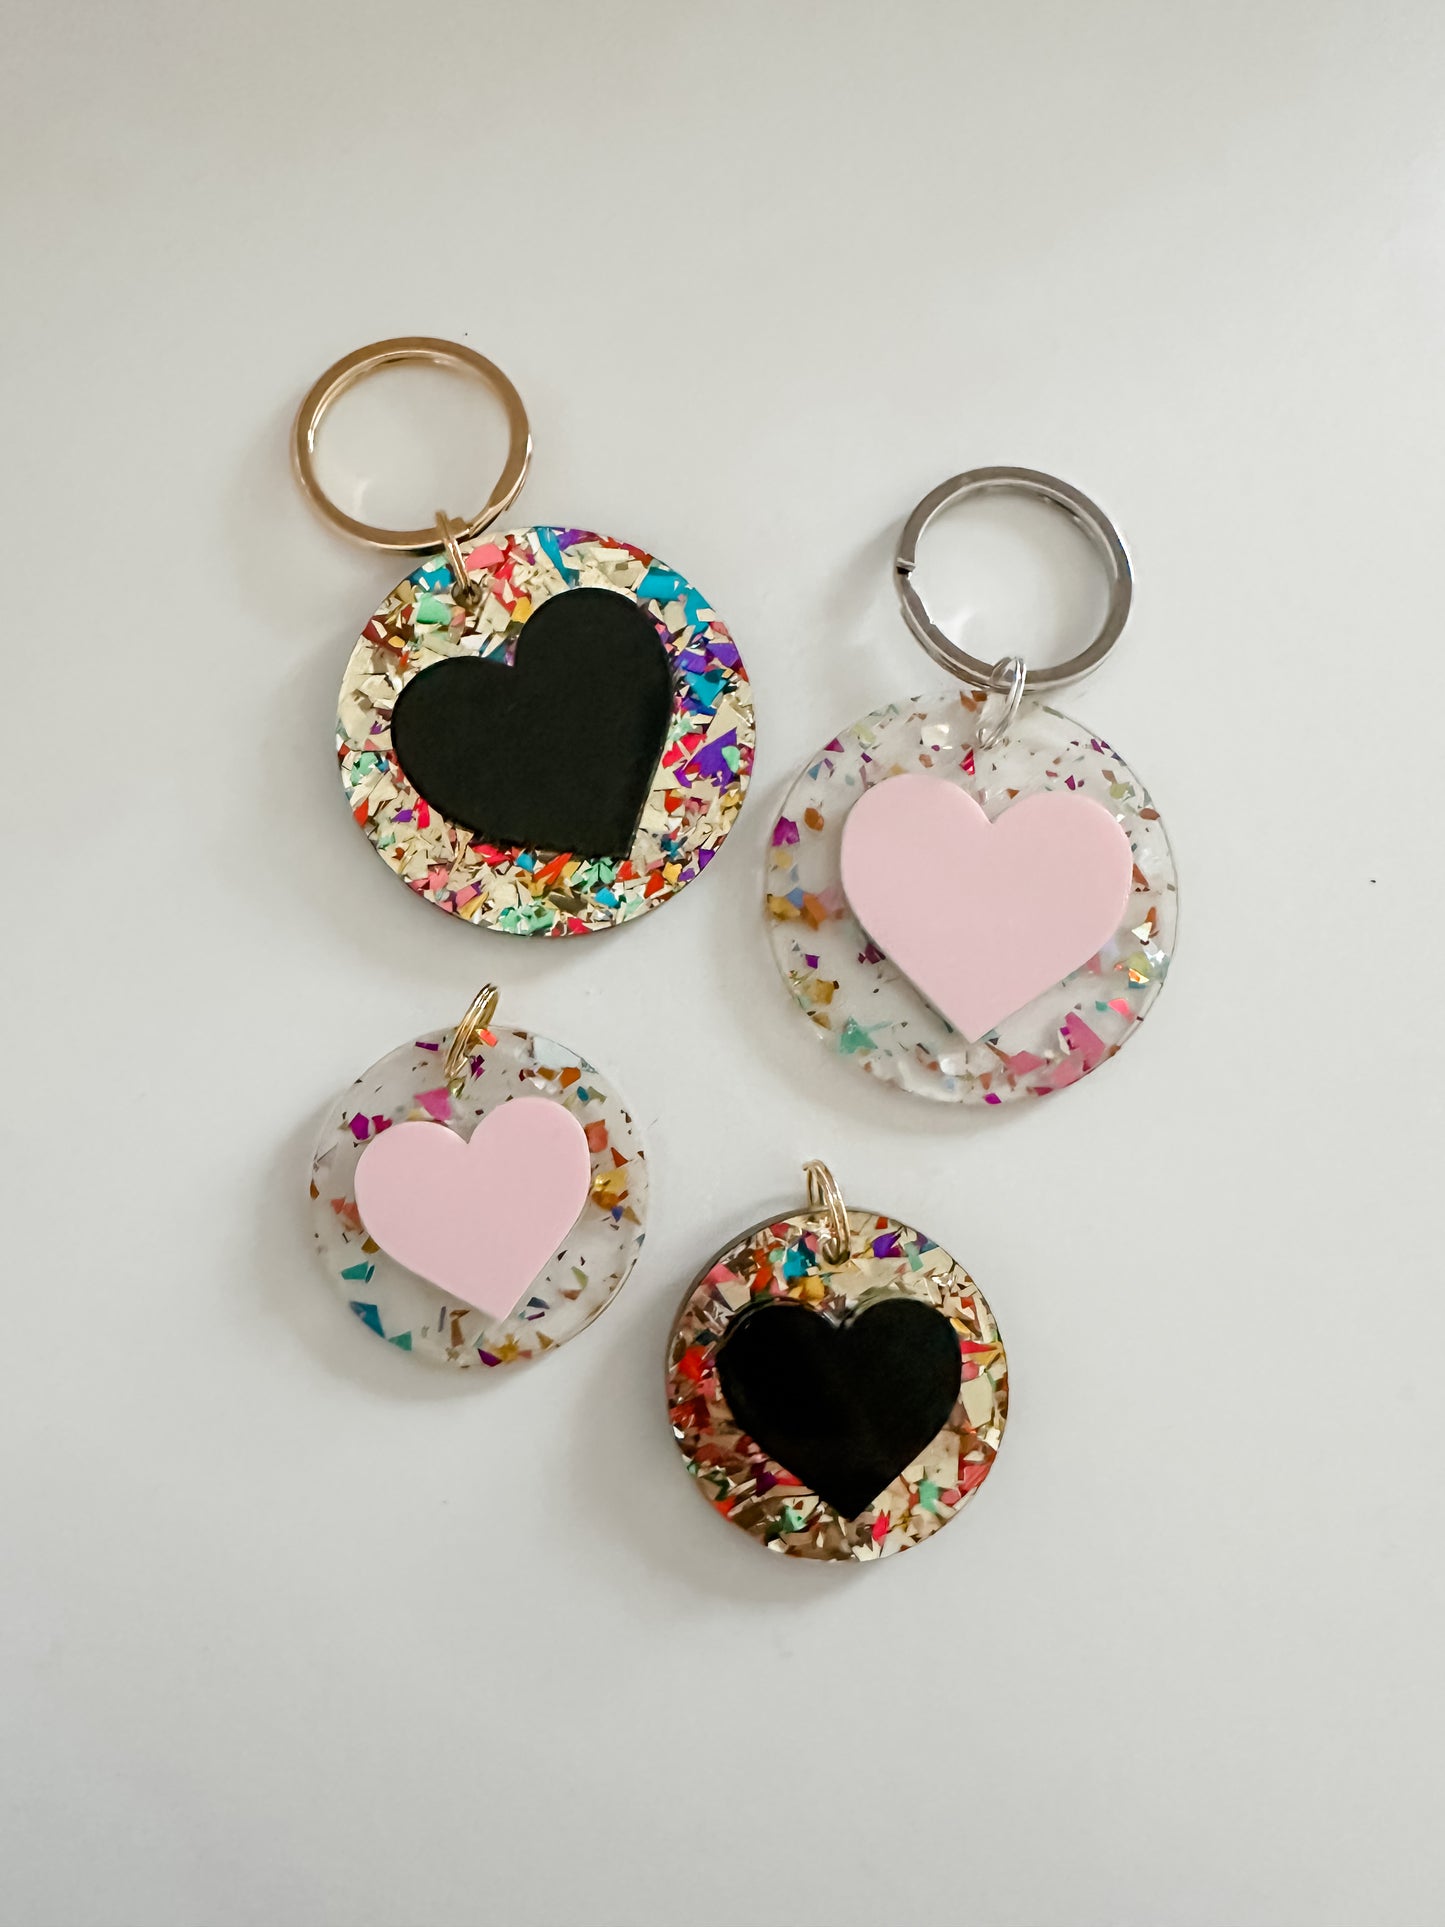 acrylic heart keychains and charms